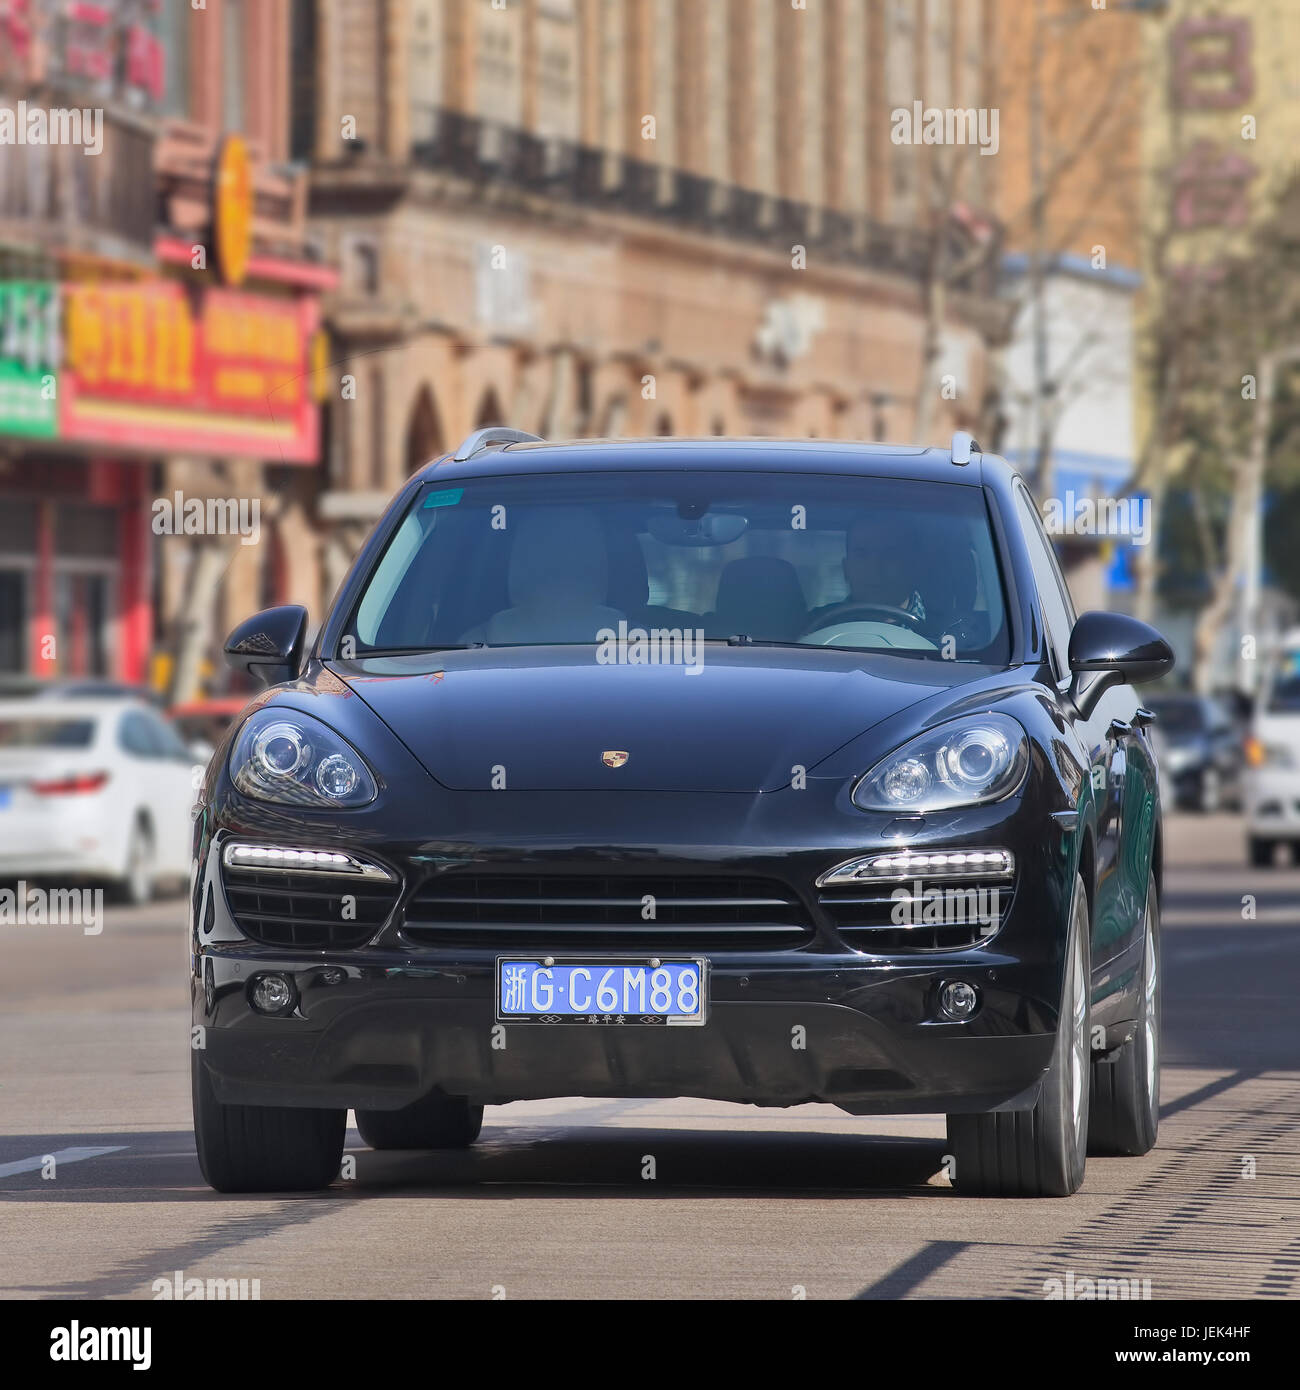 Black Porsche Cayenne. Since 2010, Porsche has tripled China sales. But After government crackdown on conspicuous consumption, luxury market is slows. Stock Photo